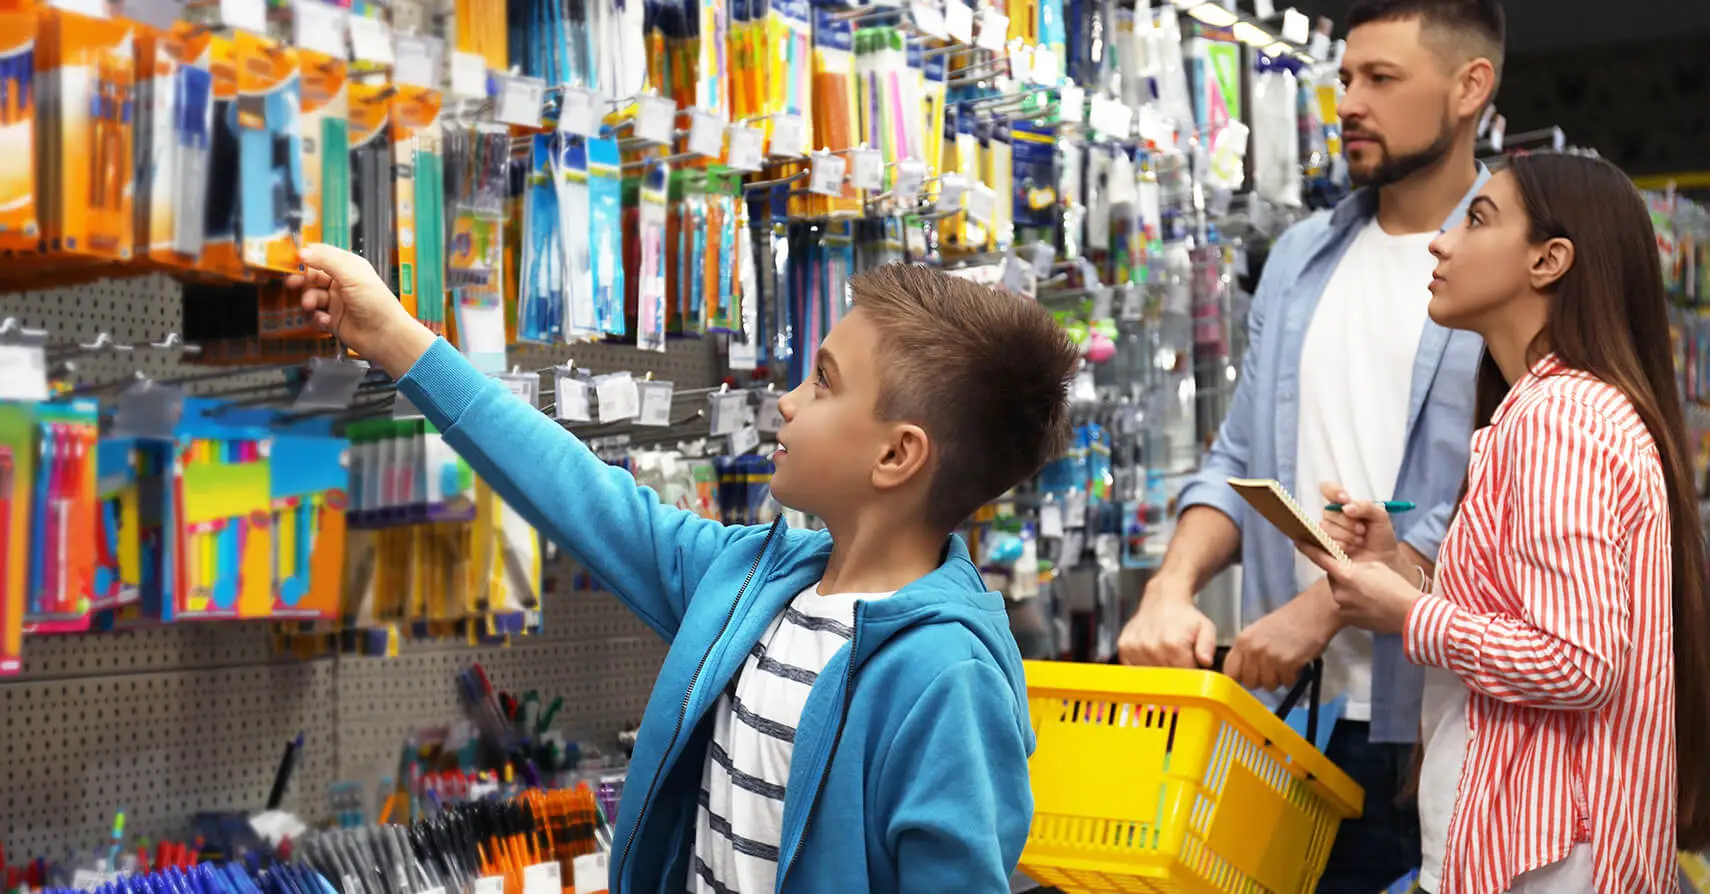 61% of Back-to-School Shoppers Are Using Omnichannel Shopping Behaviors